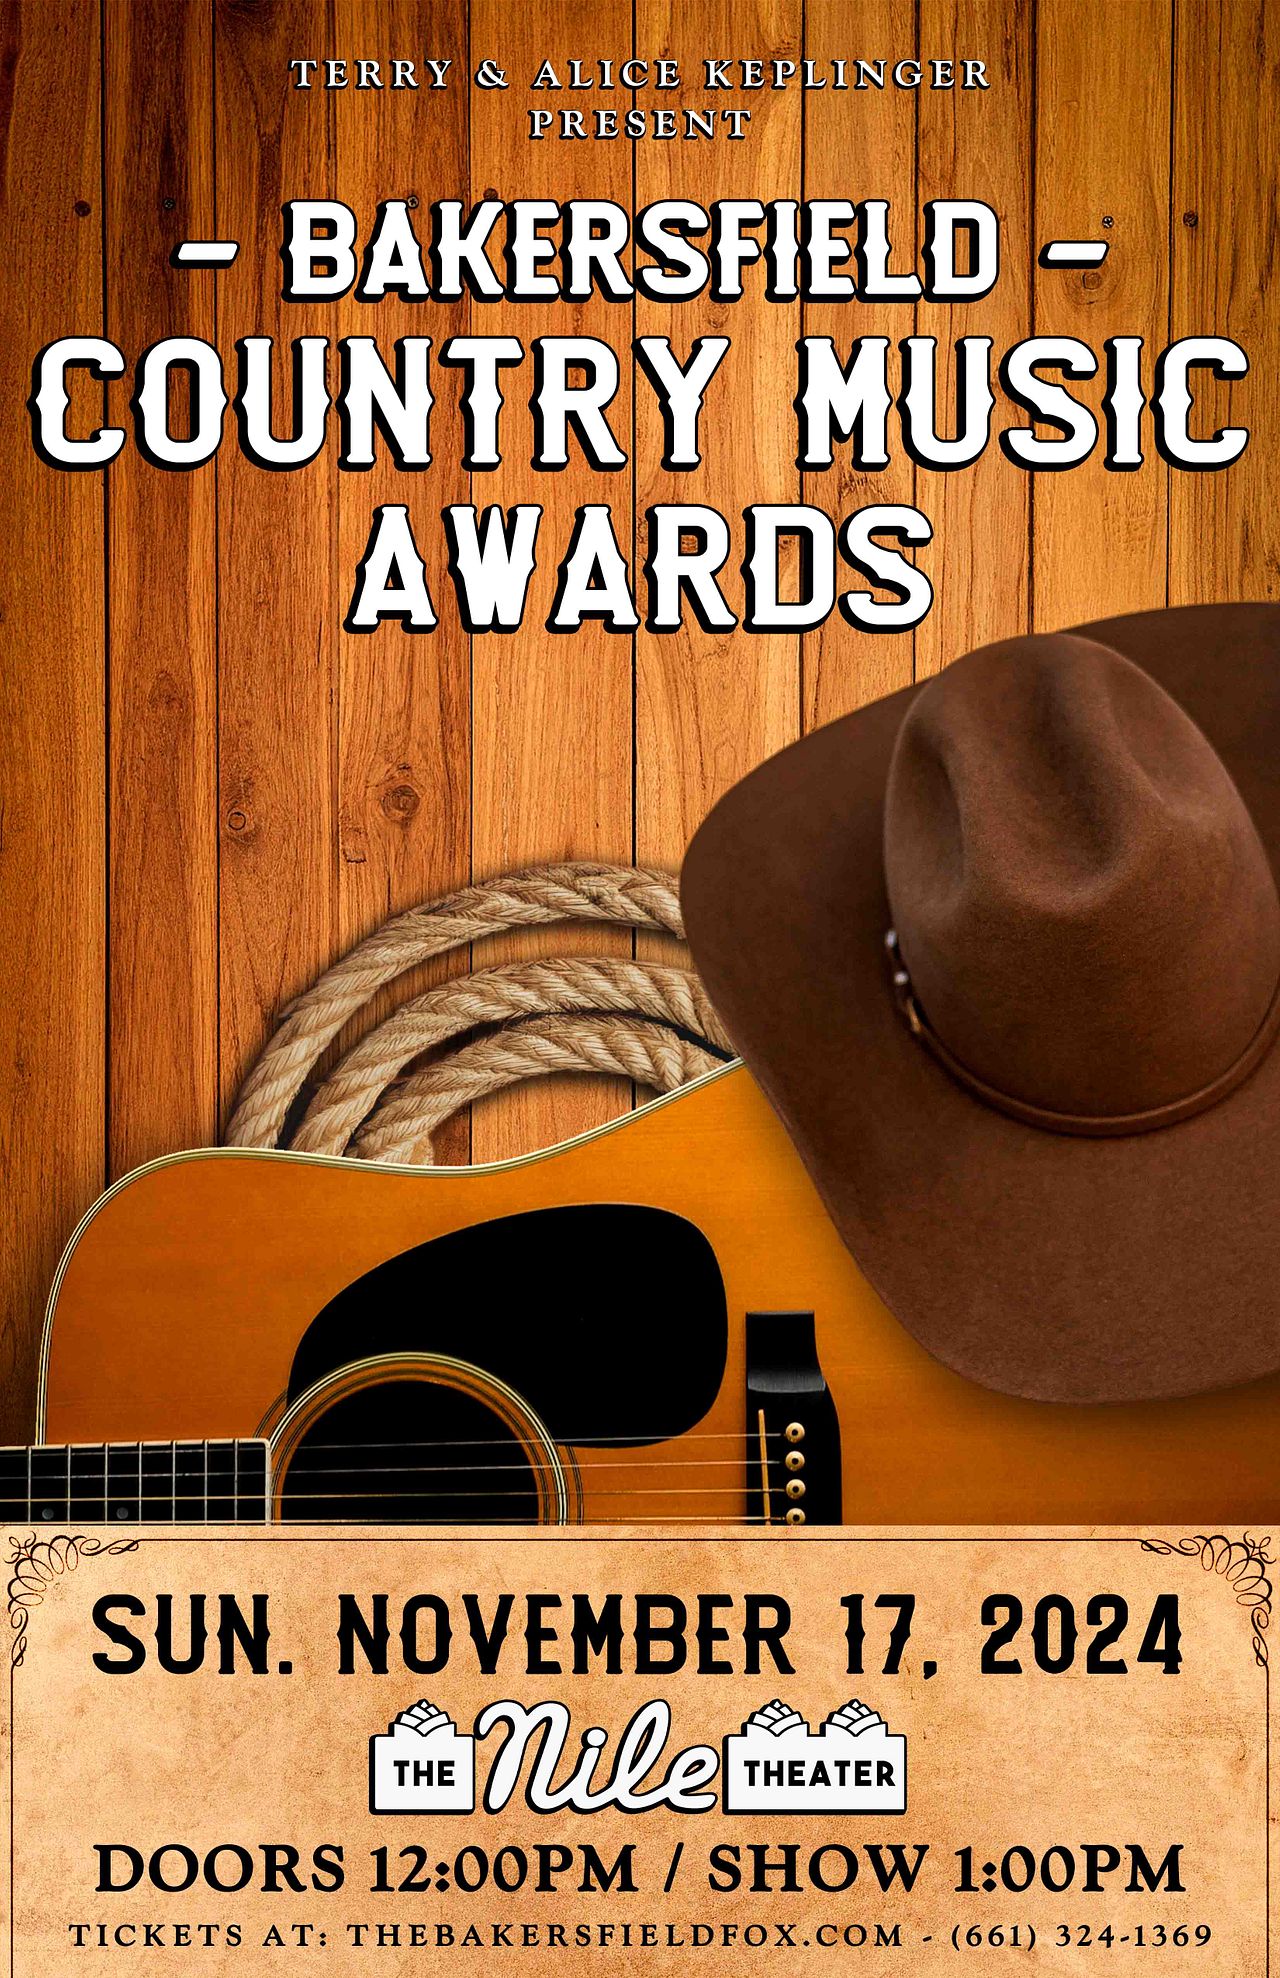 Bakersfield Country Music Awards Tickets at The Nile Theater Reserved